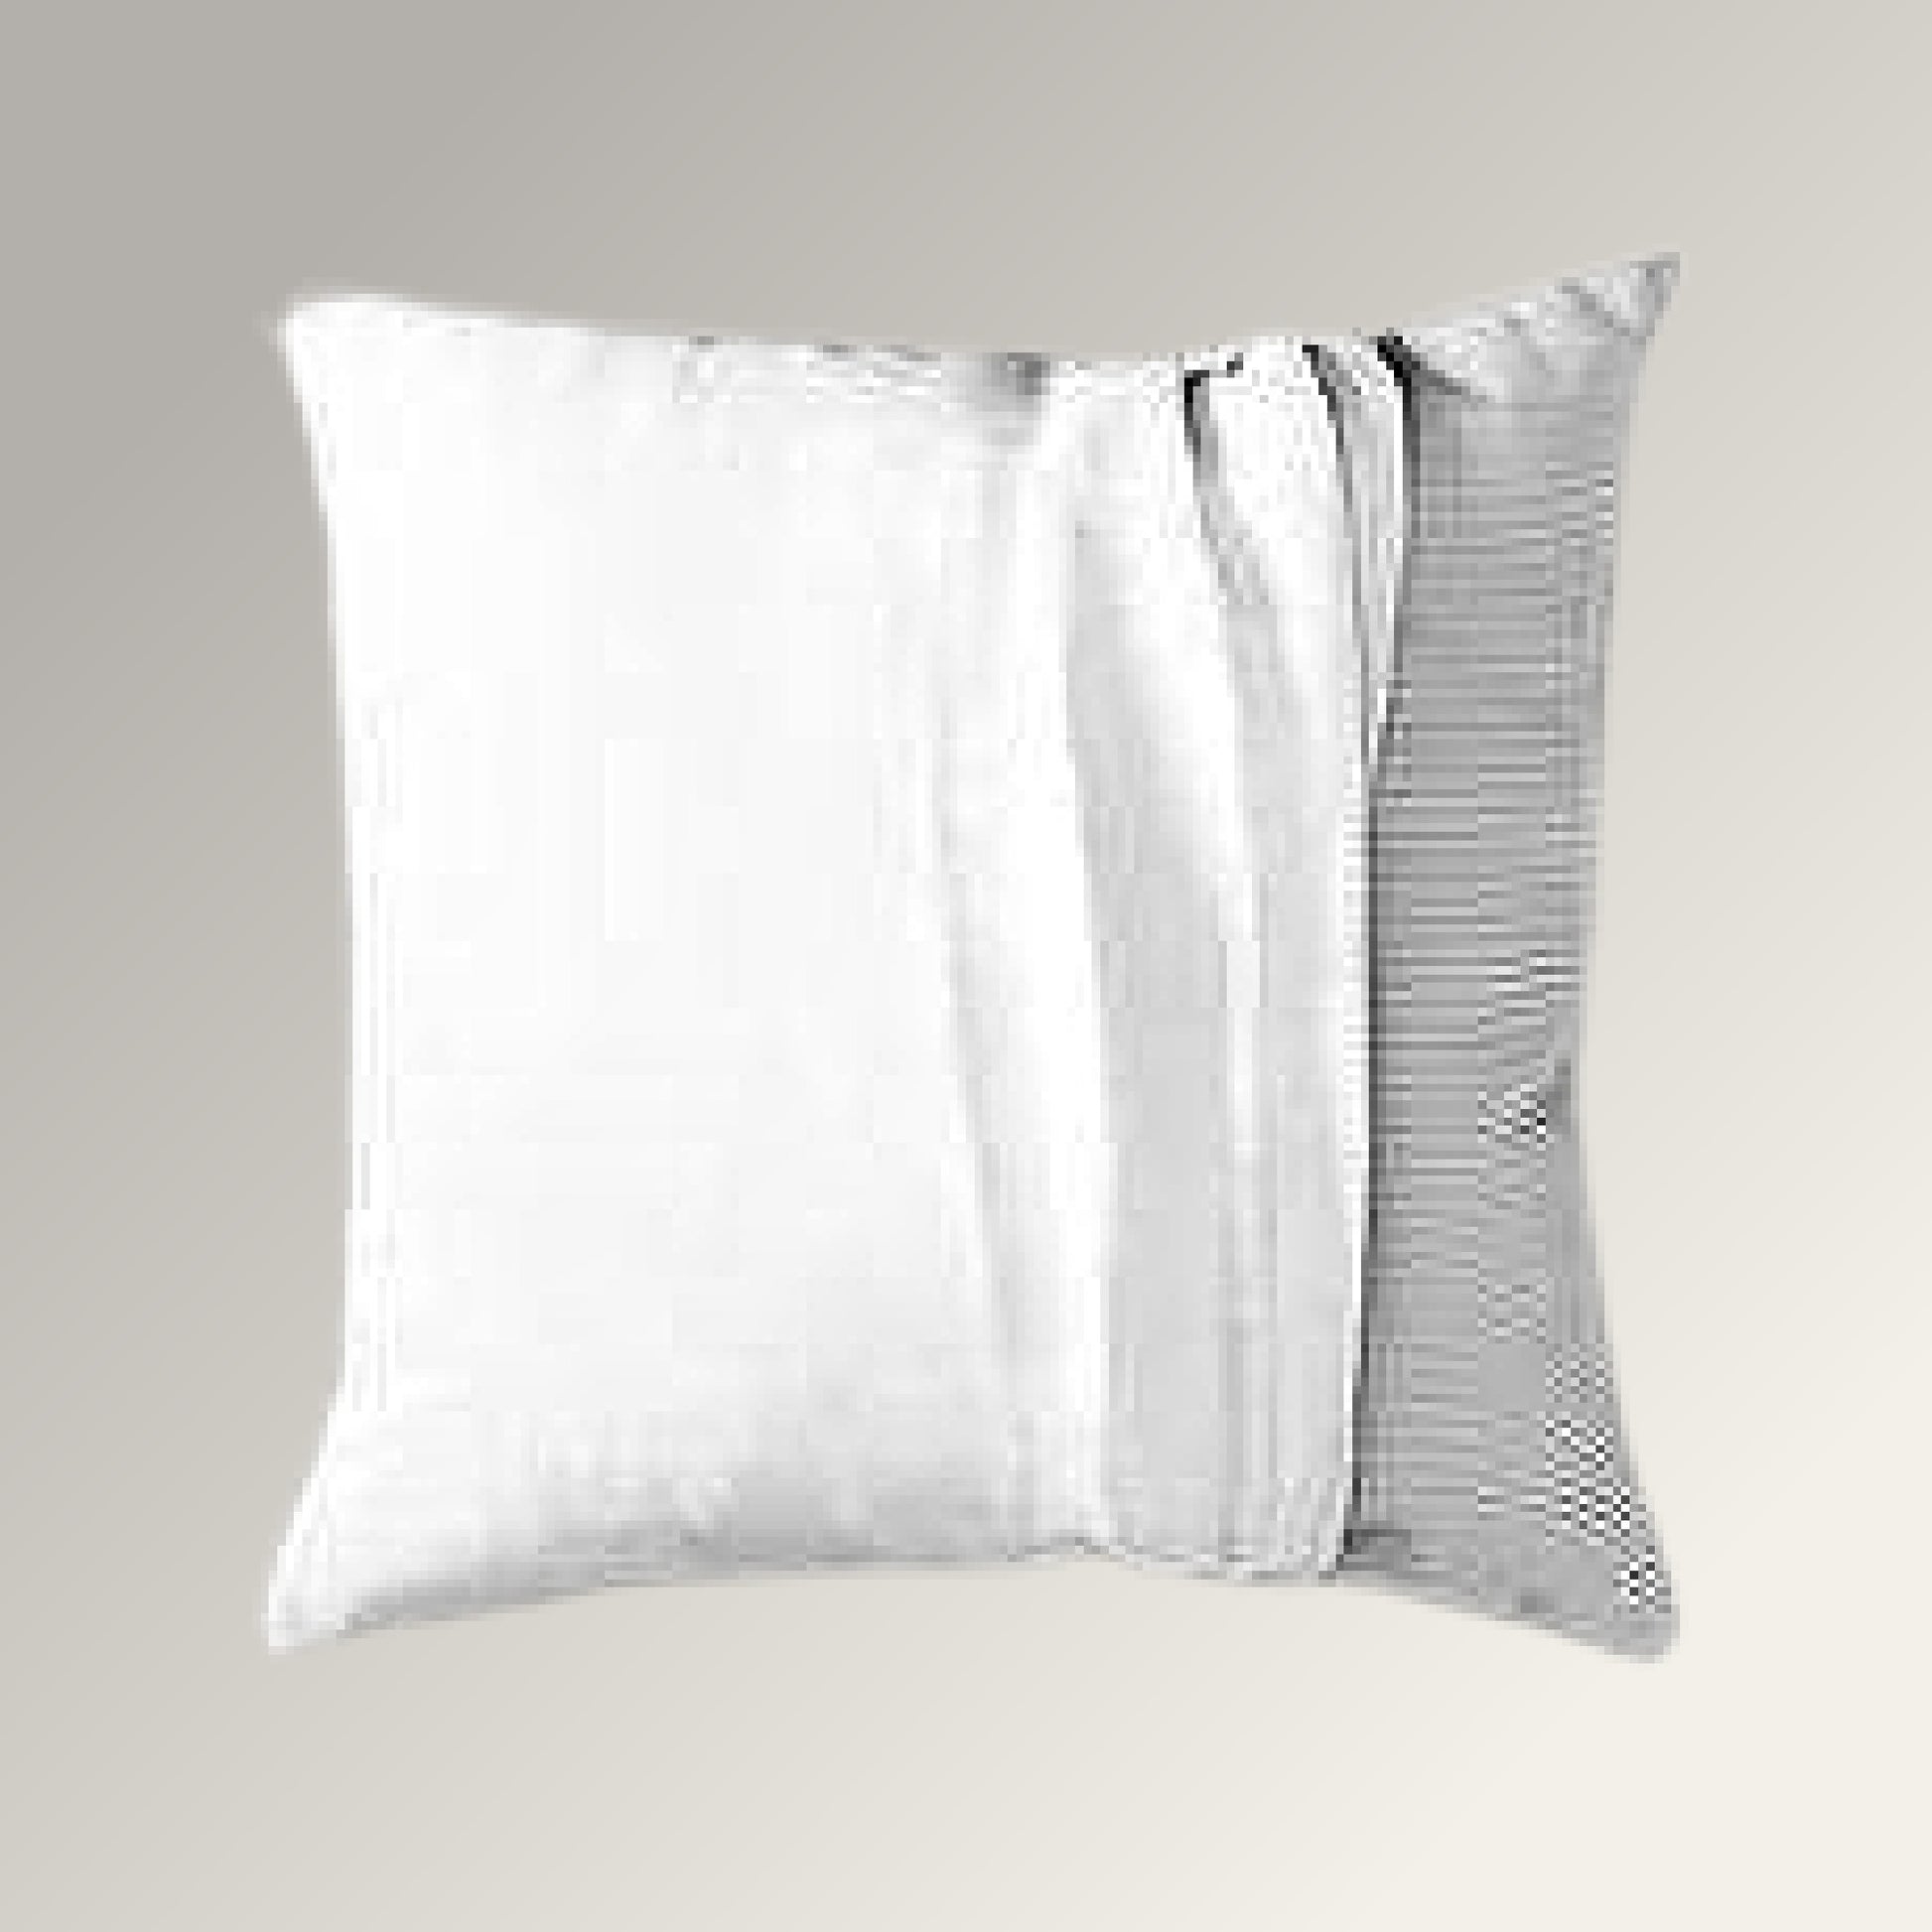 Mock up of a pillow case being pulled over an existing square pillow